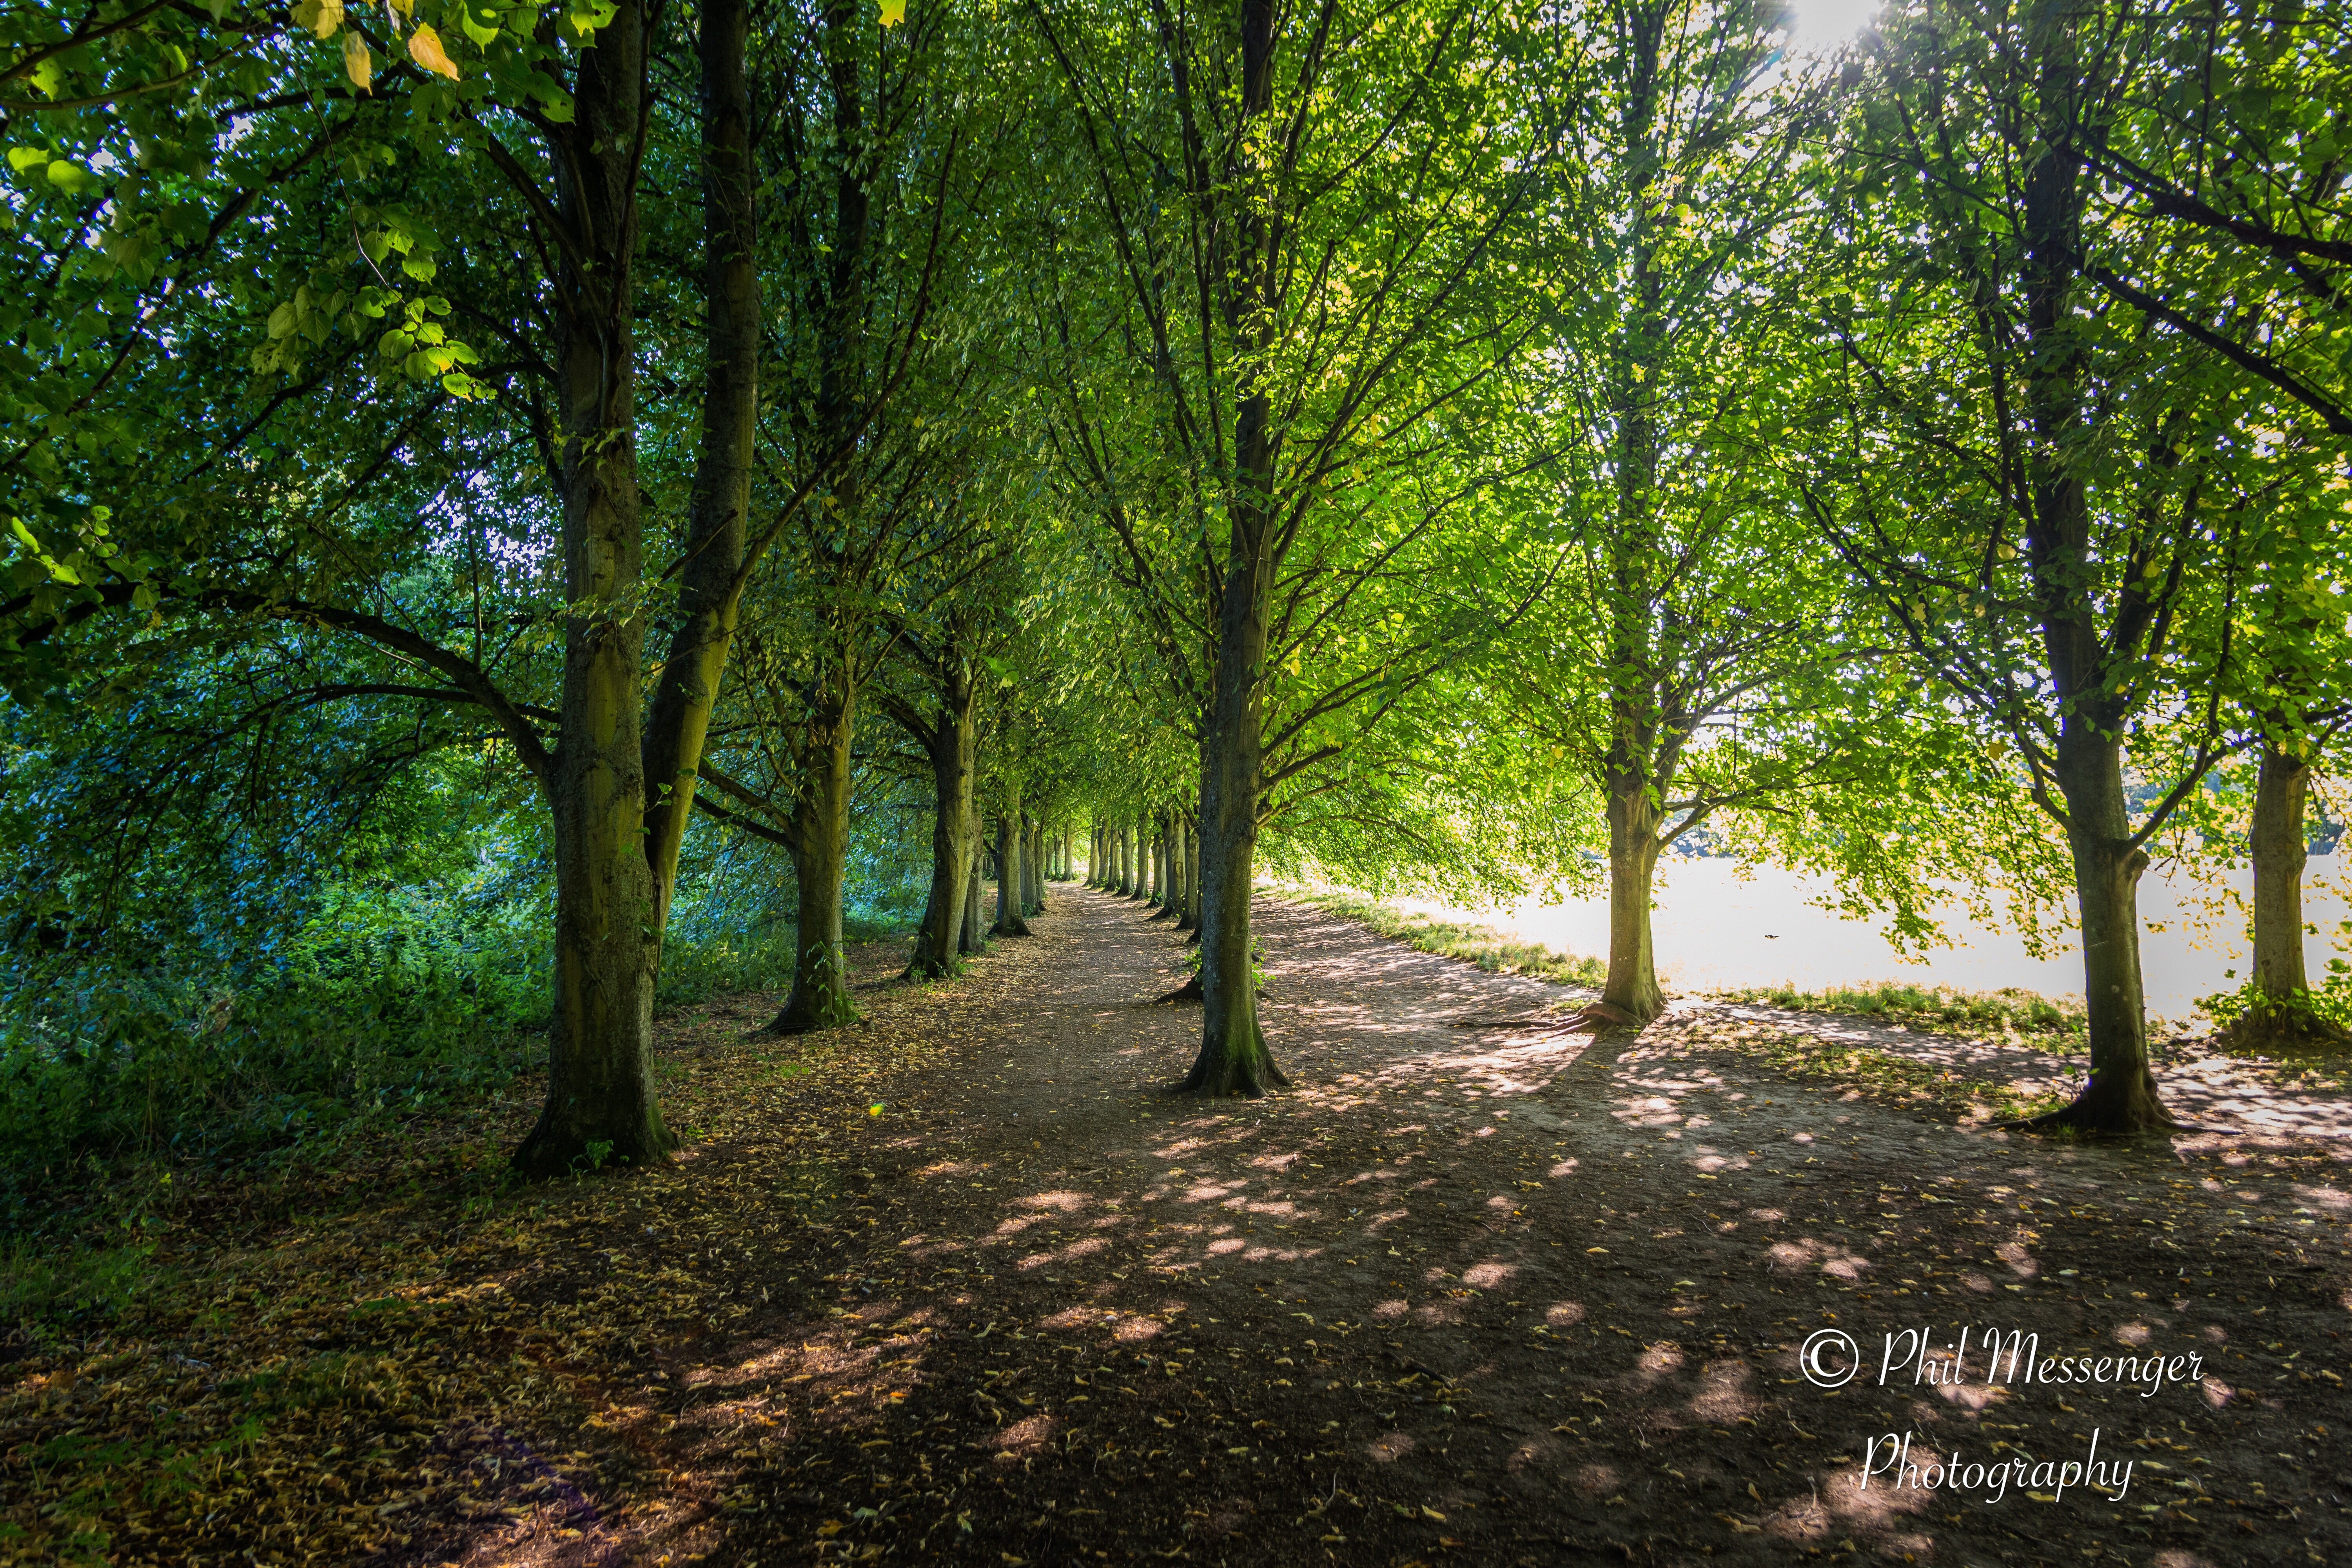 Dappled sunlight through the avenue of trees at Coate Water, Swindon.